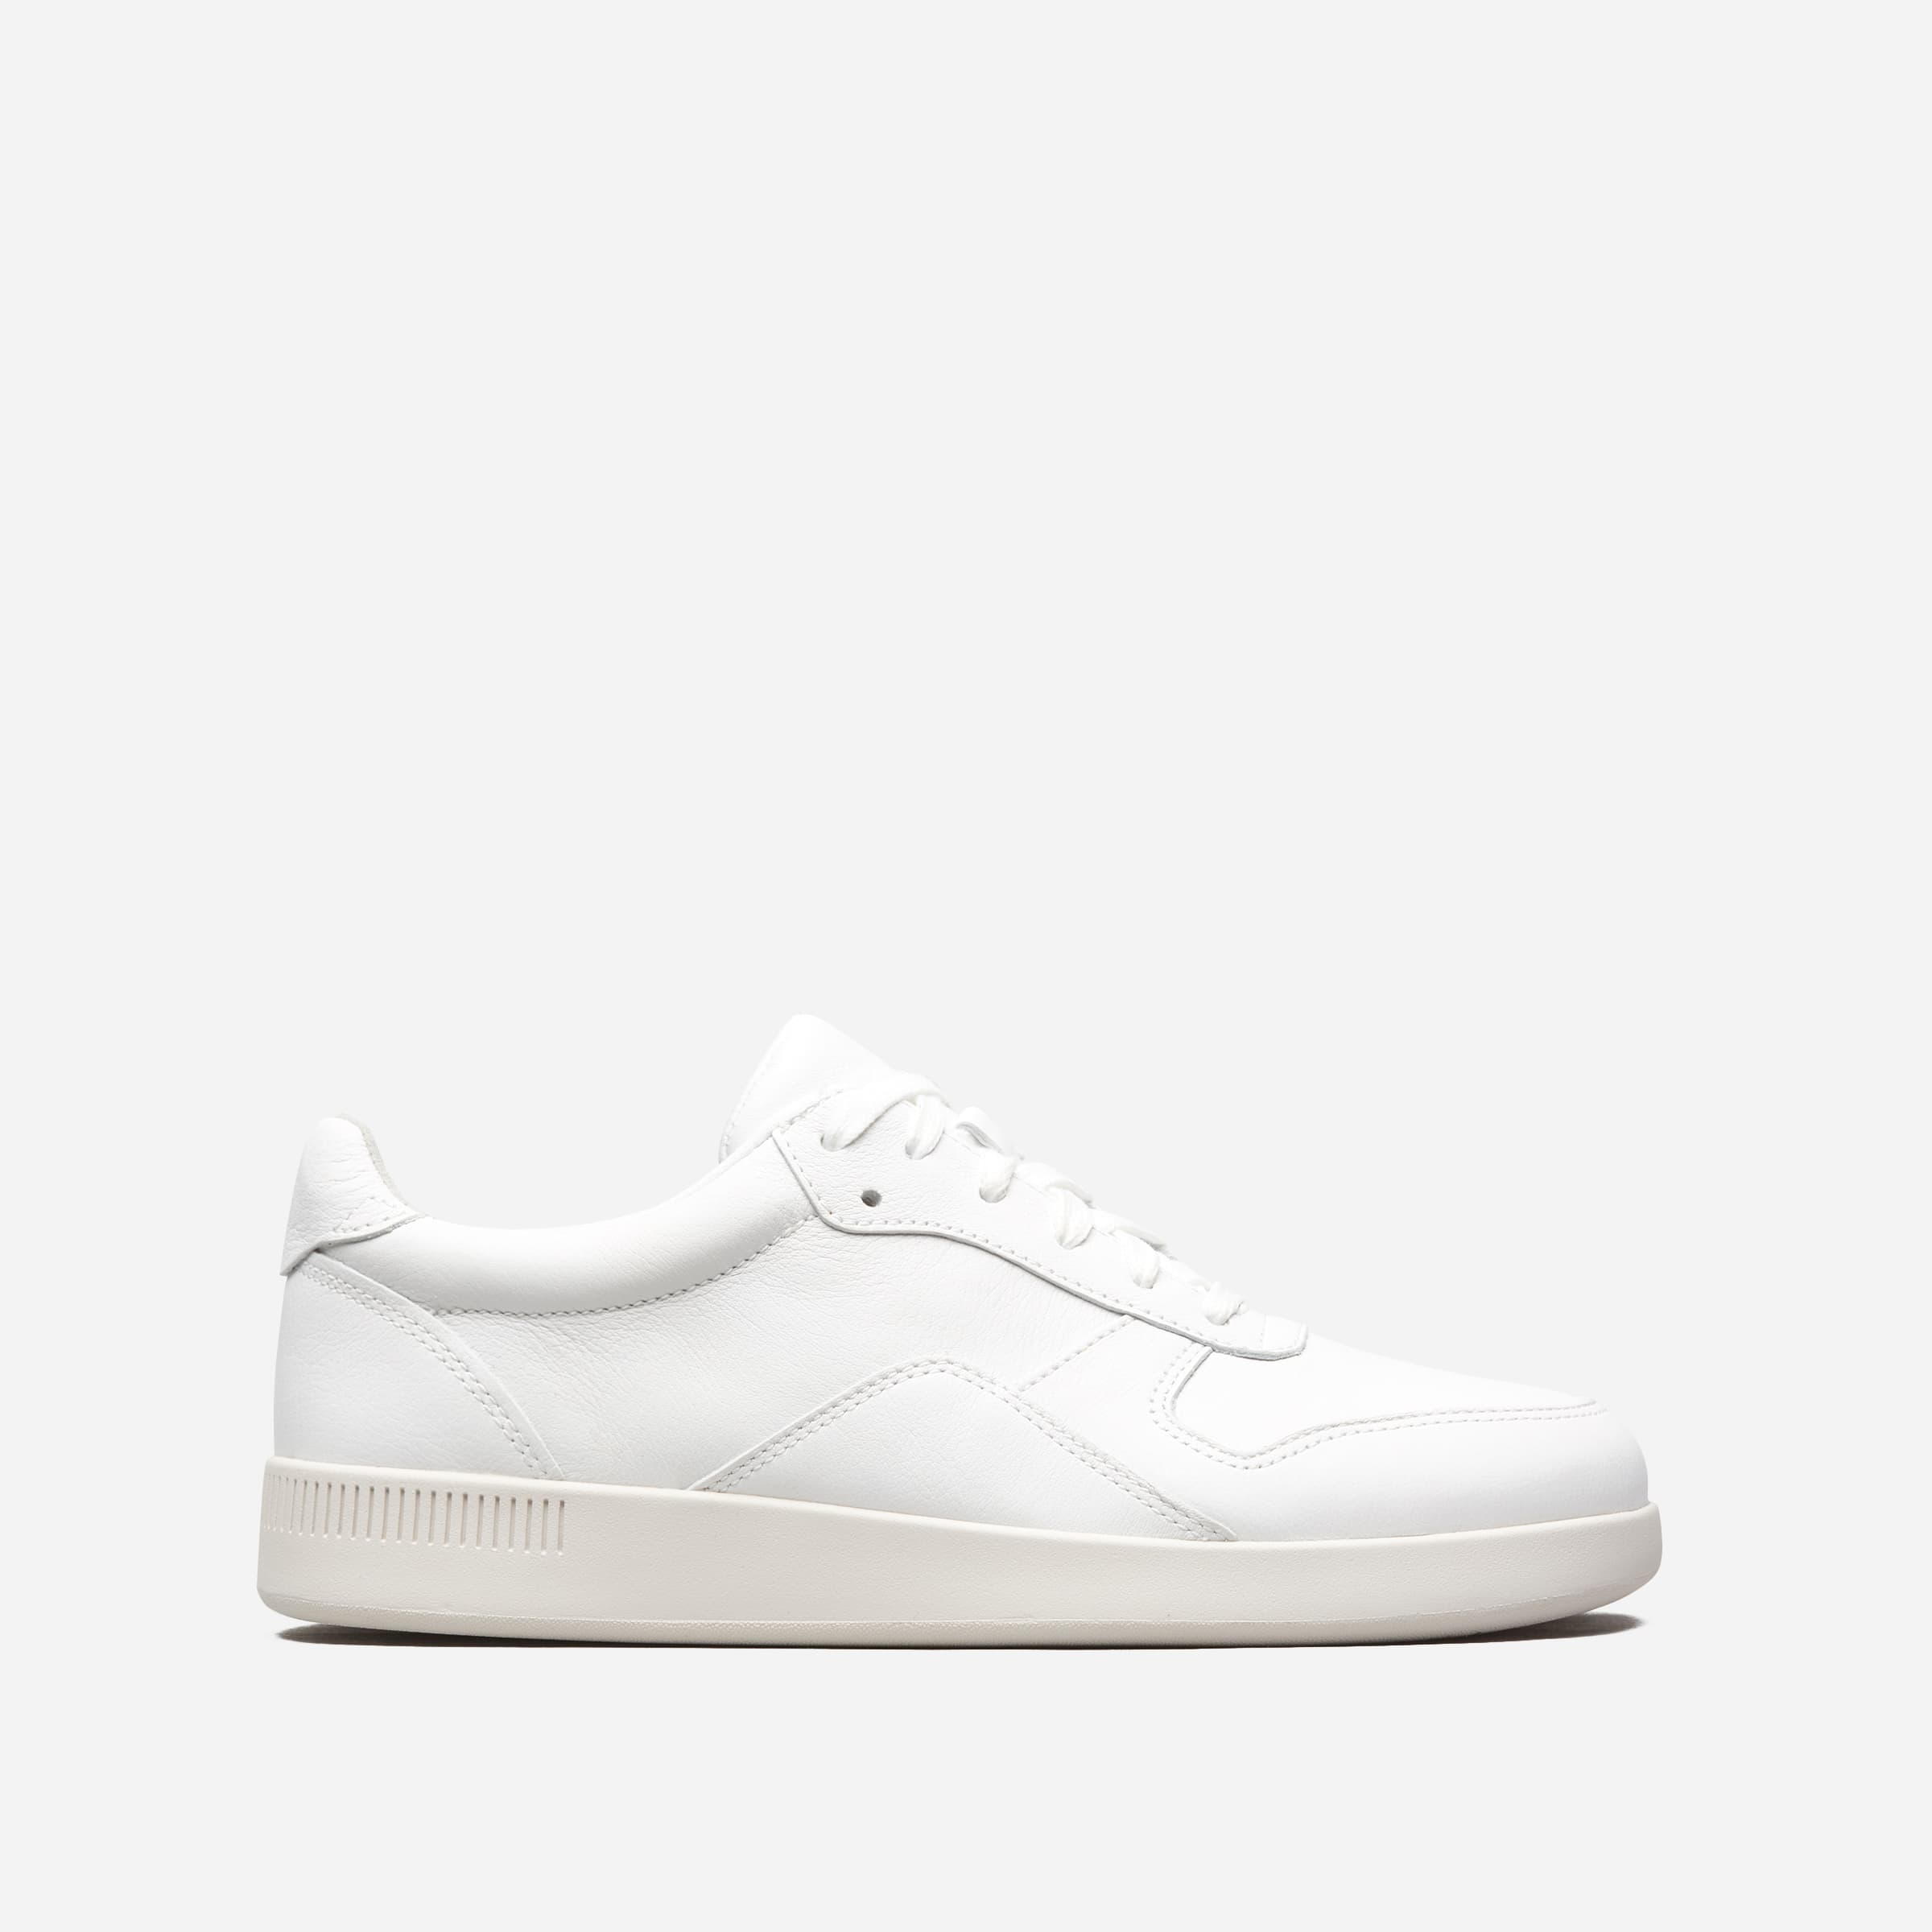 Everlane's new Court sneakers: all your questions answered! – Jess Keys